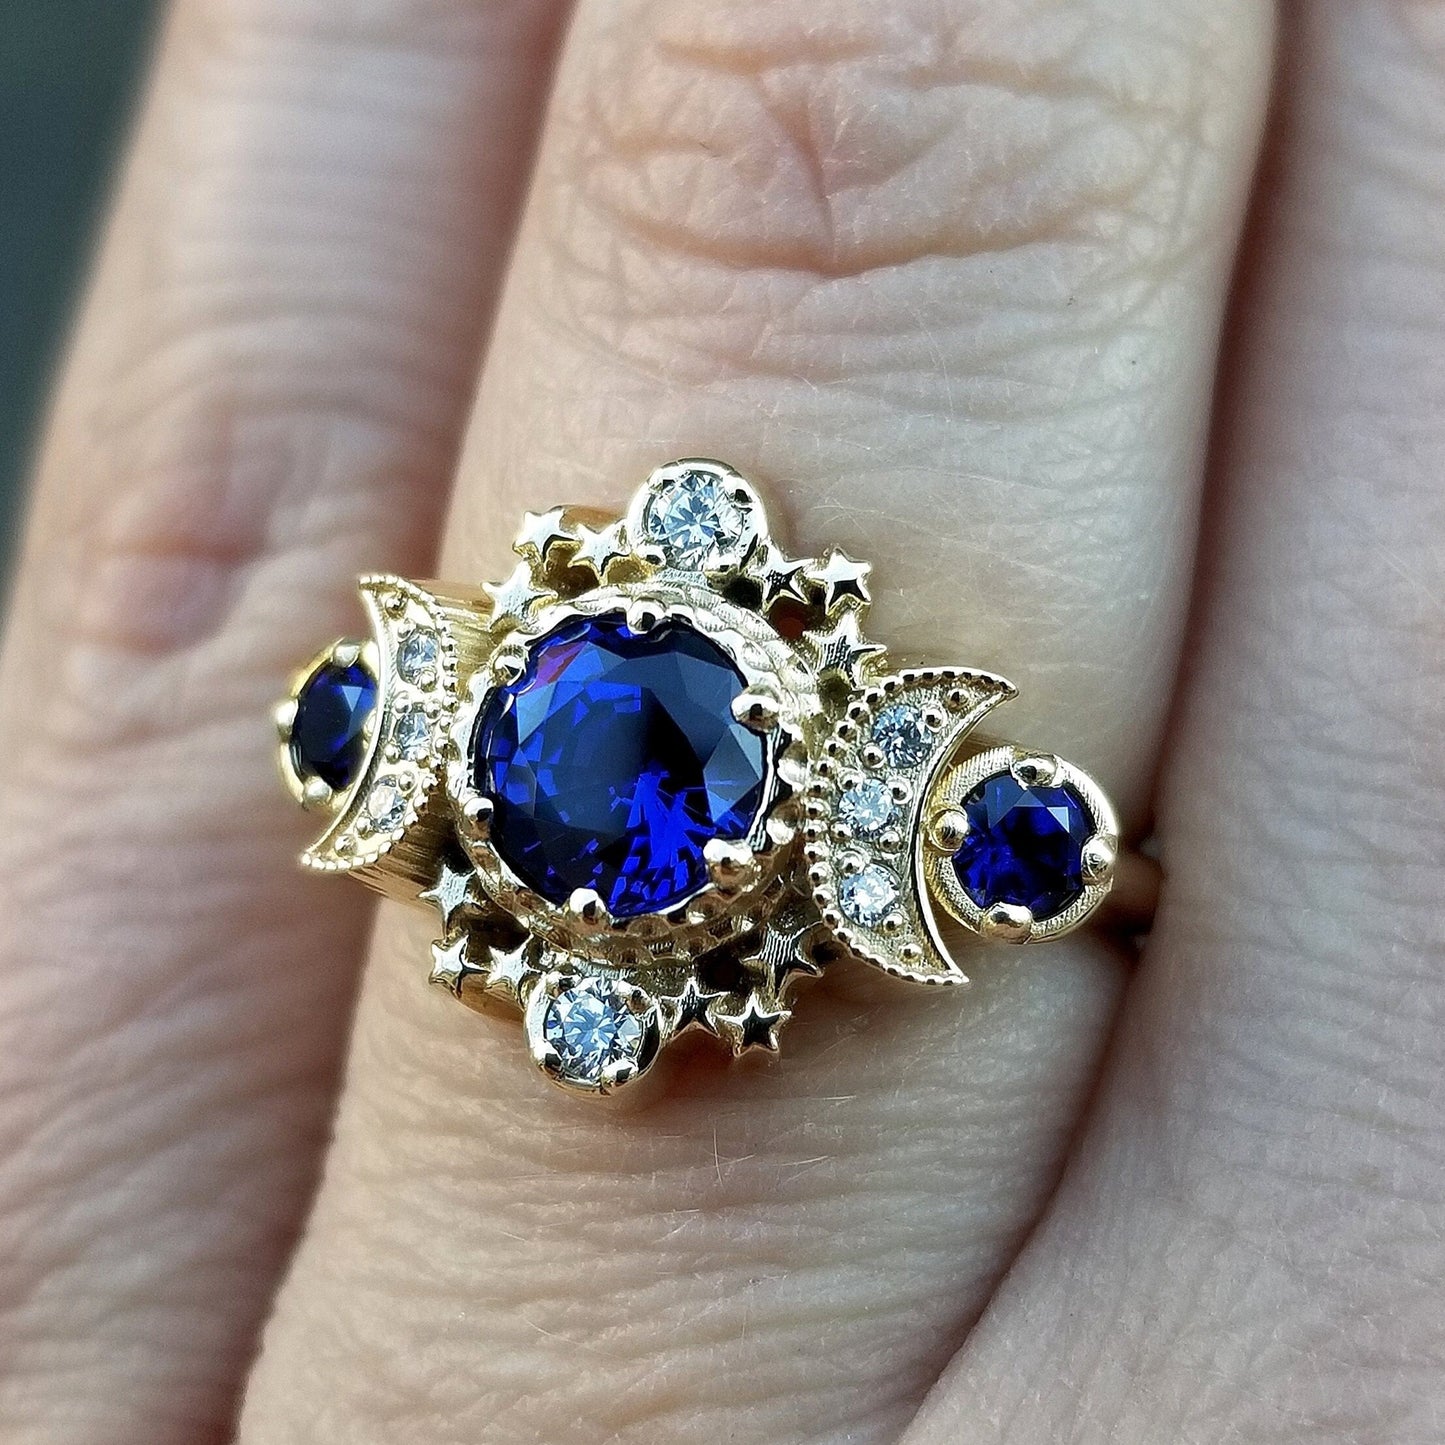 Chatham Sapphire Cosmos Triple Moon Engagement Ring - 14k Gold and Diamonds